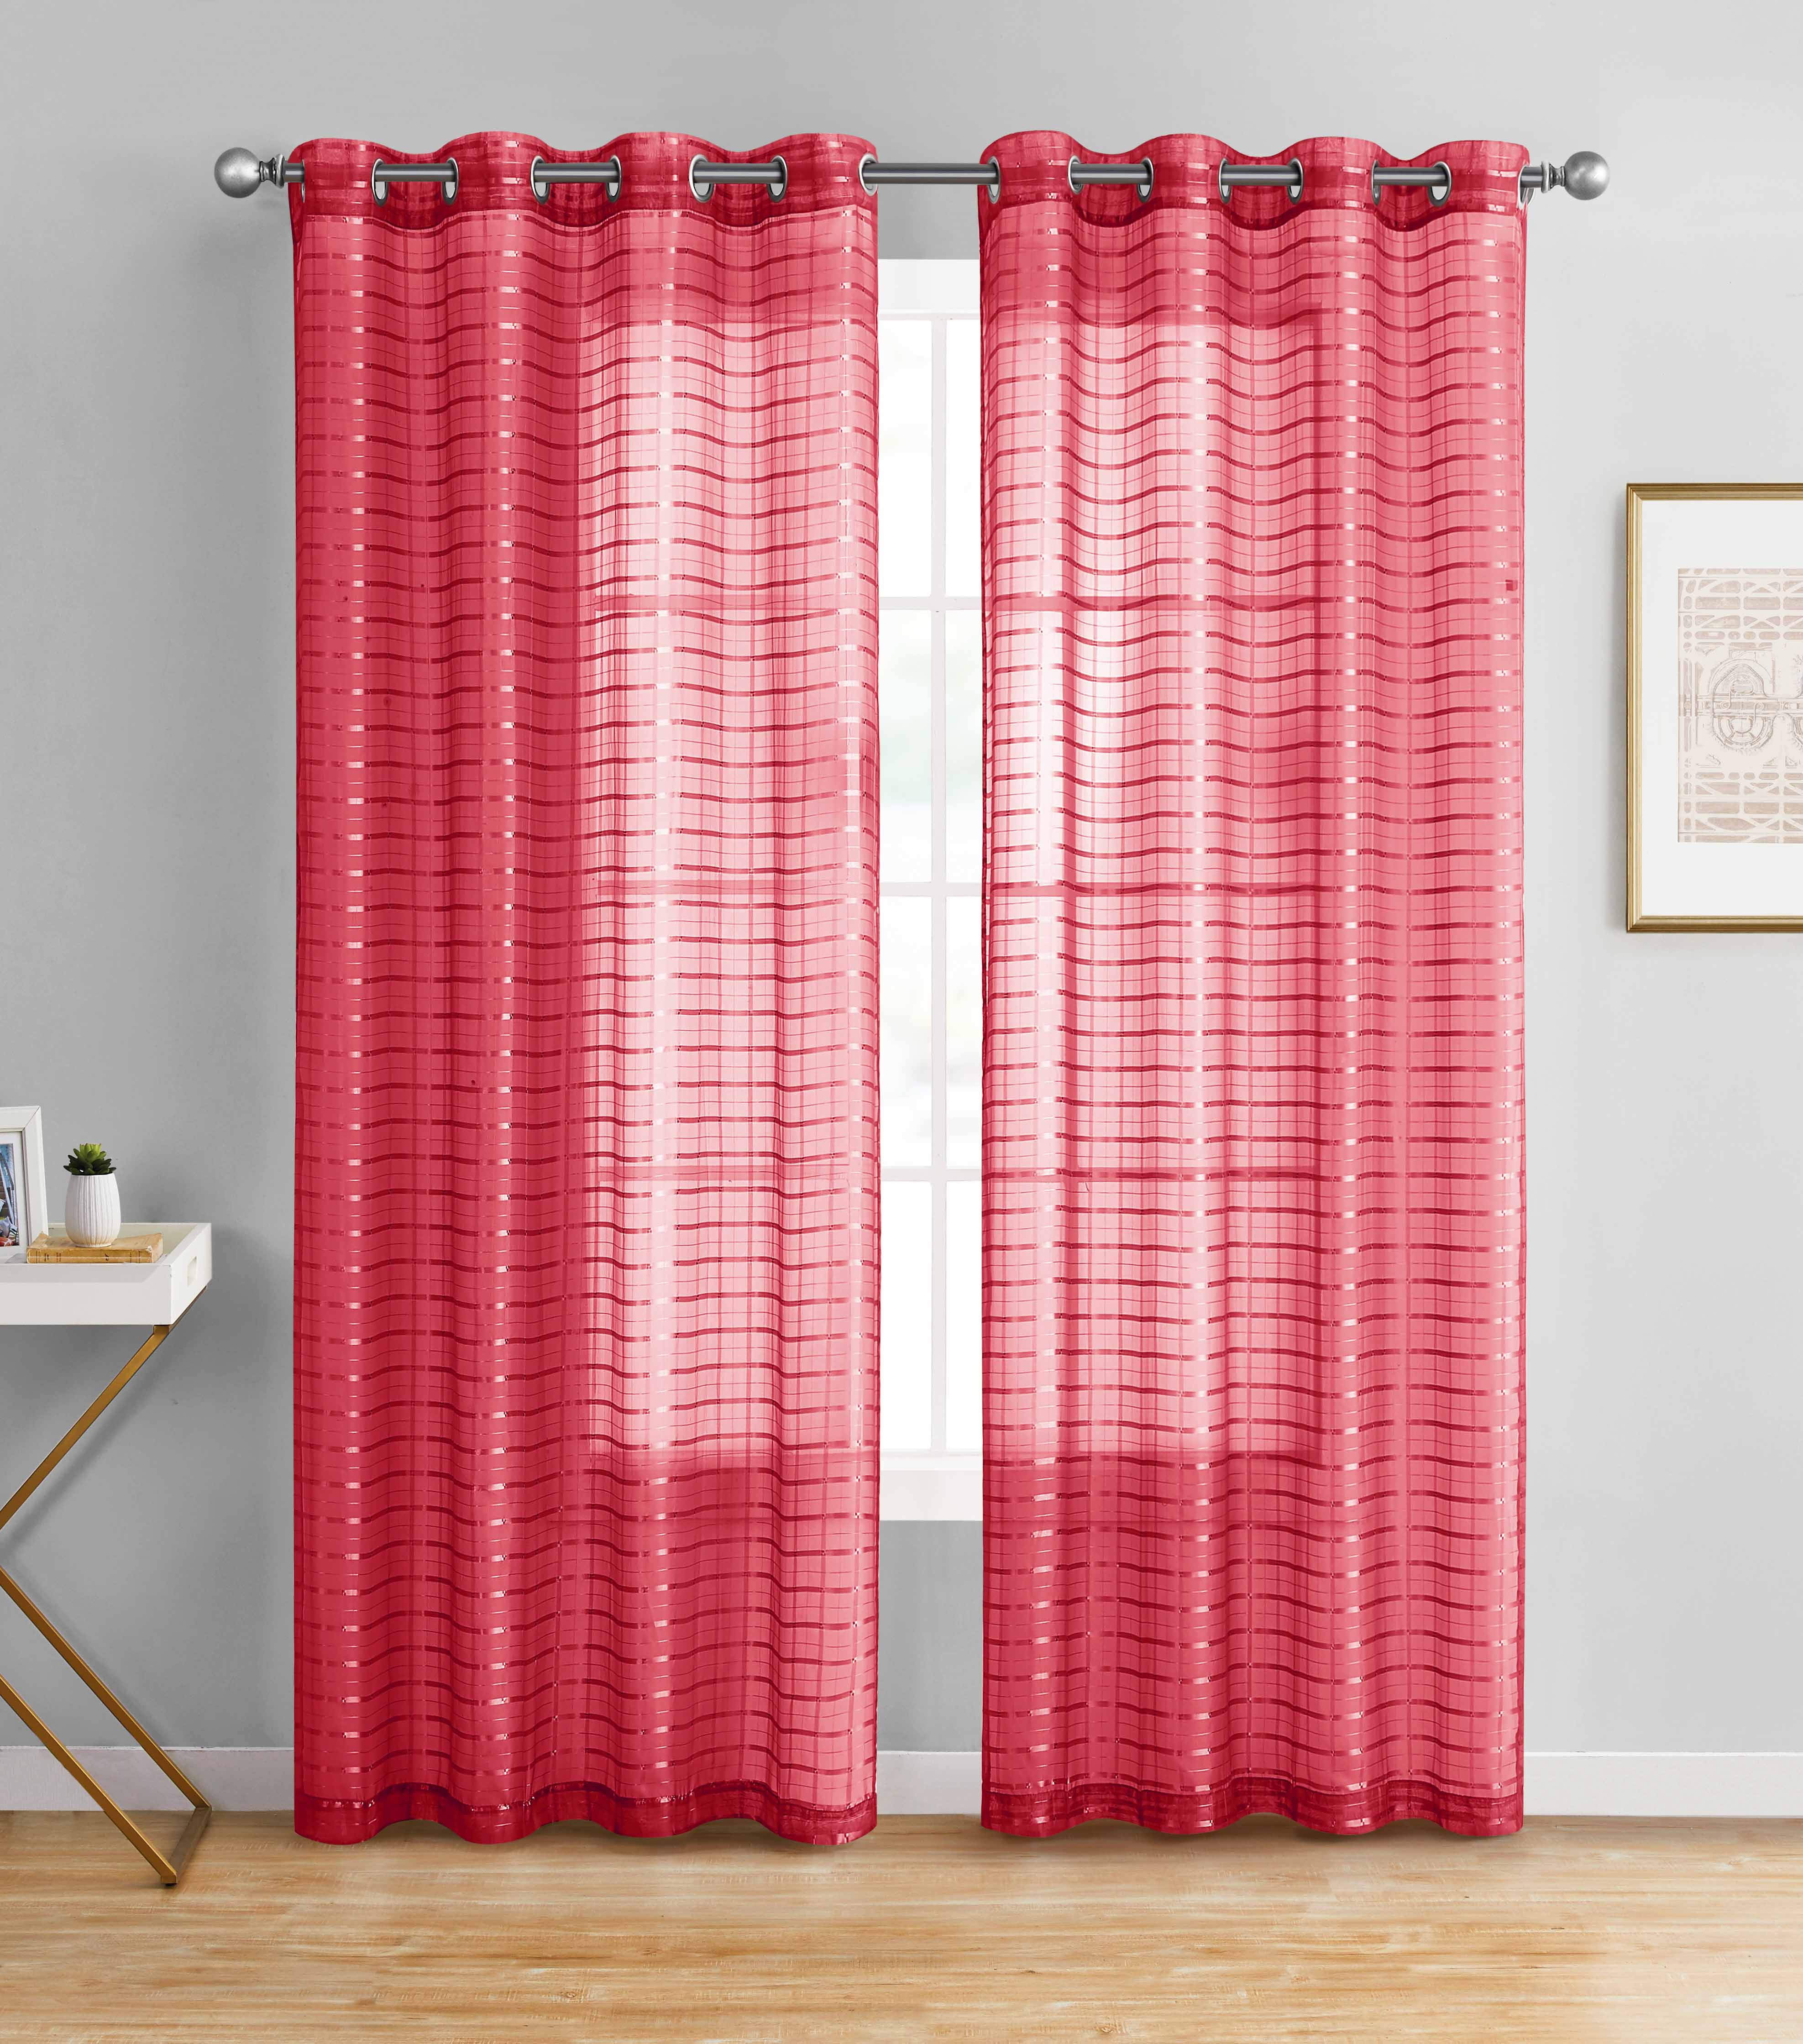 55in x 90in Red Window Curtain Panel with Circle Design Sheer Top Layer 